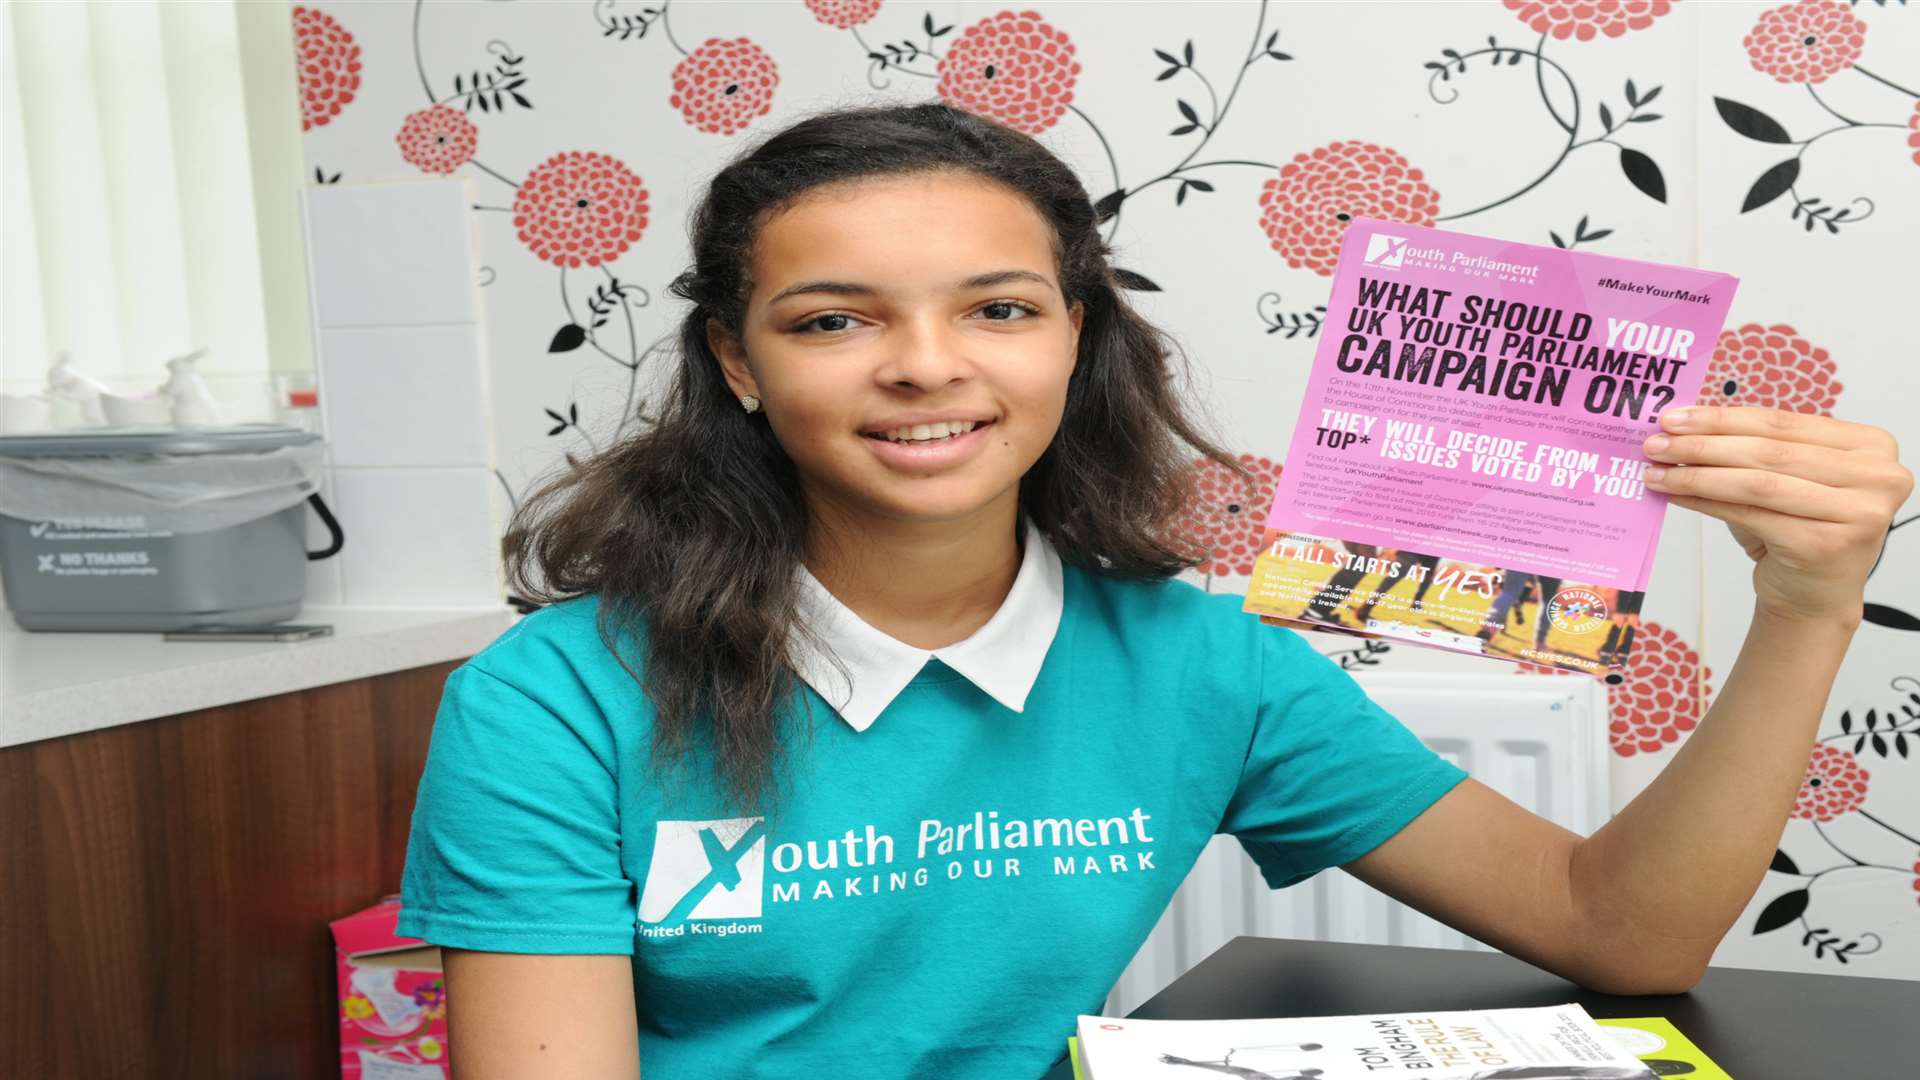 Angel Layer is campaigning for young people to get involved with youth Parliament